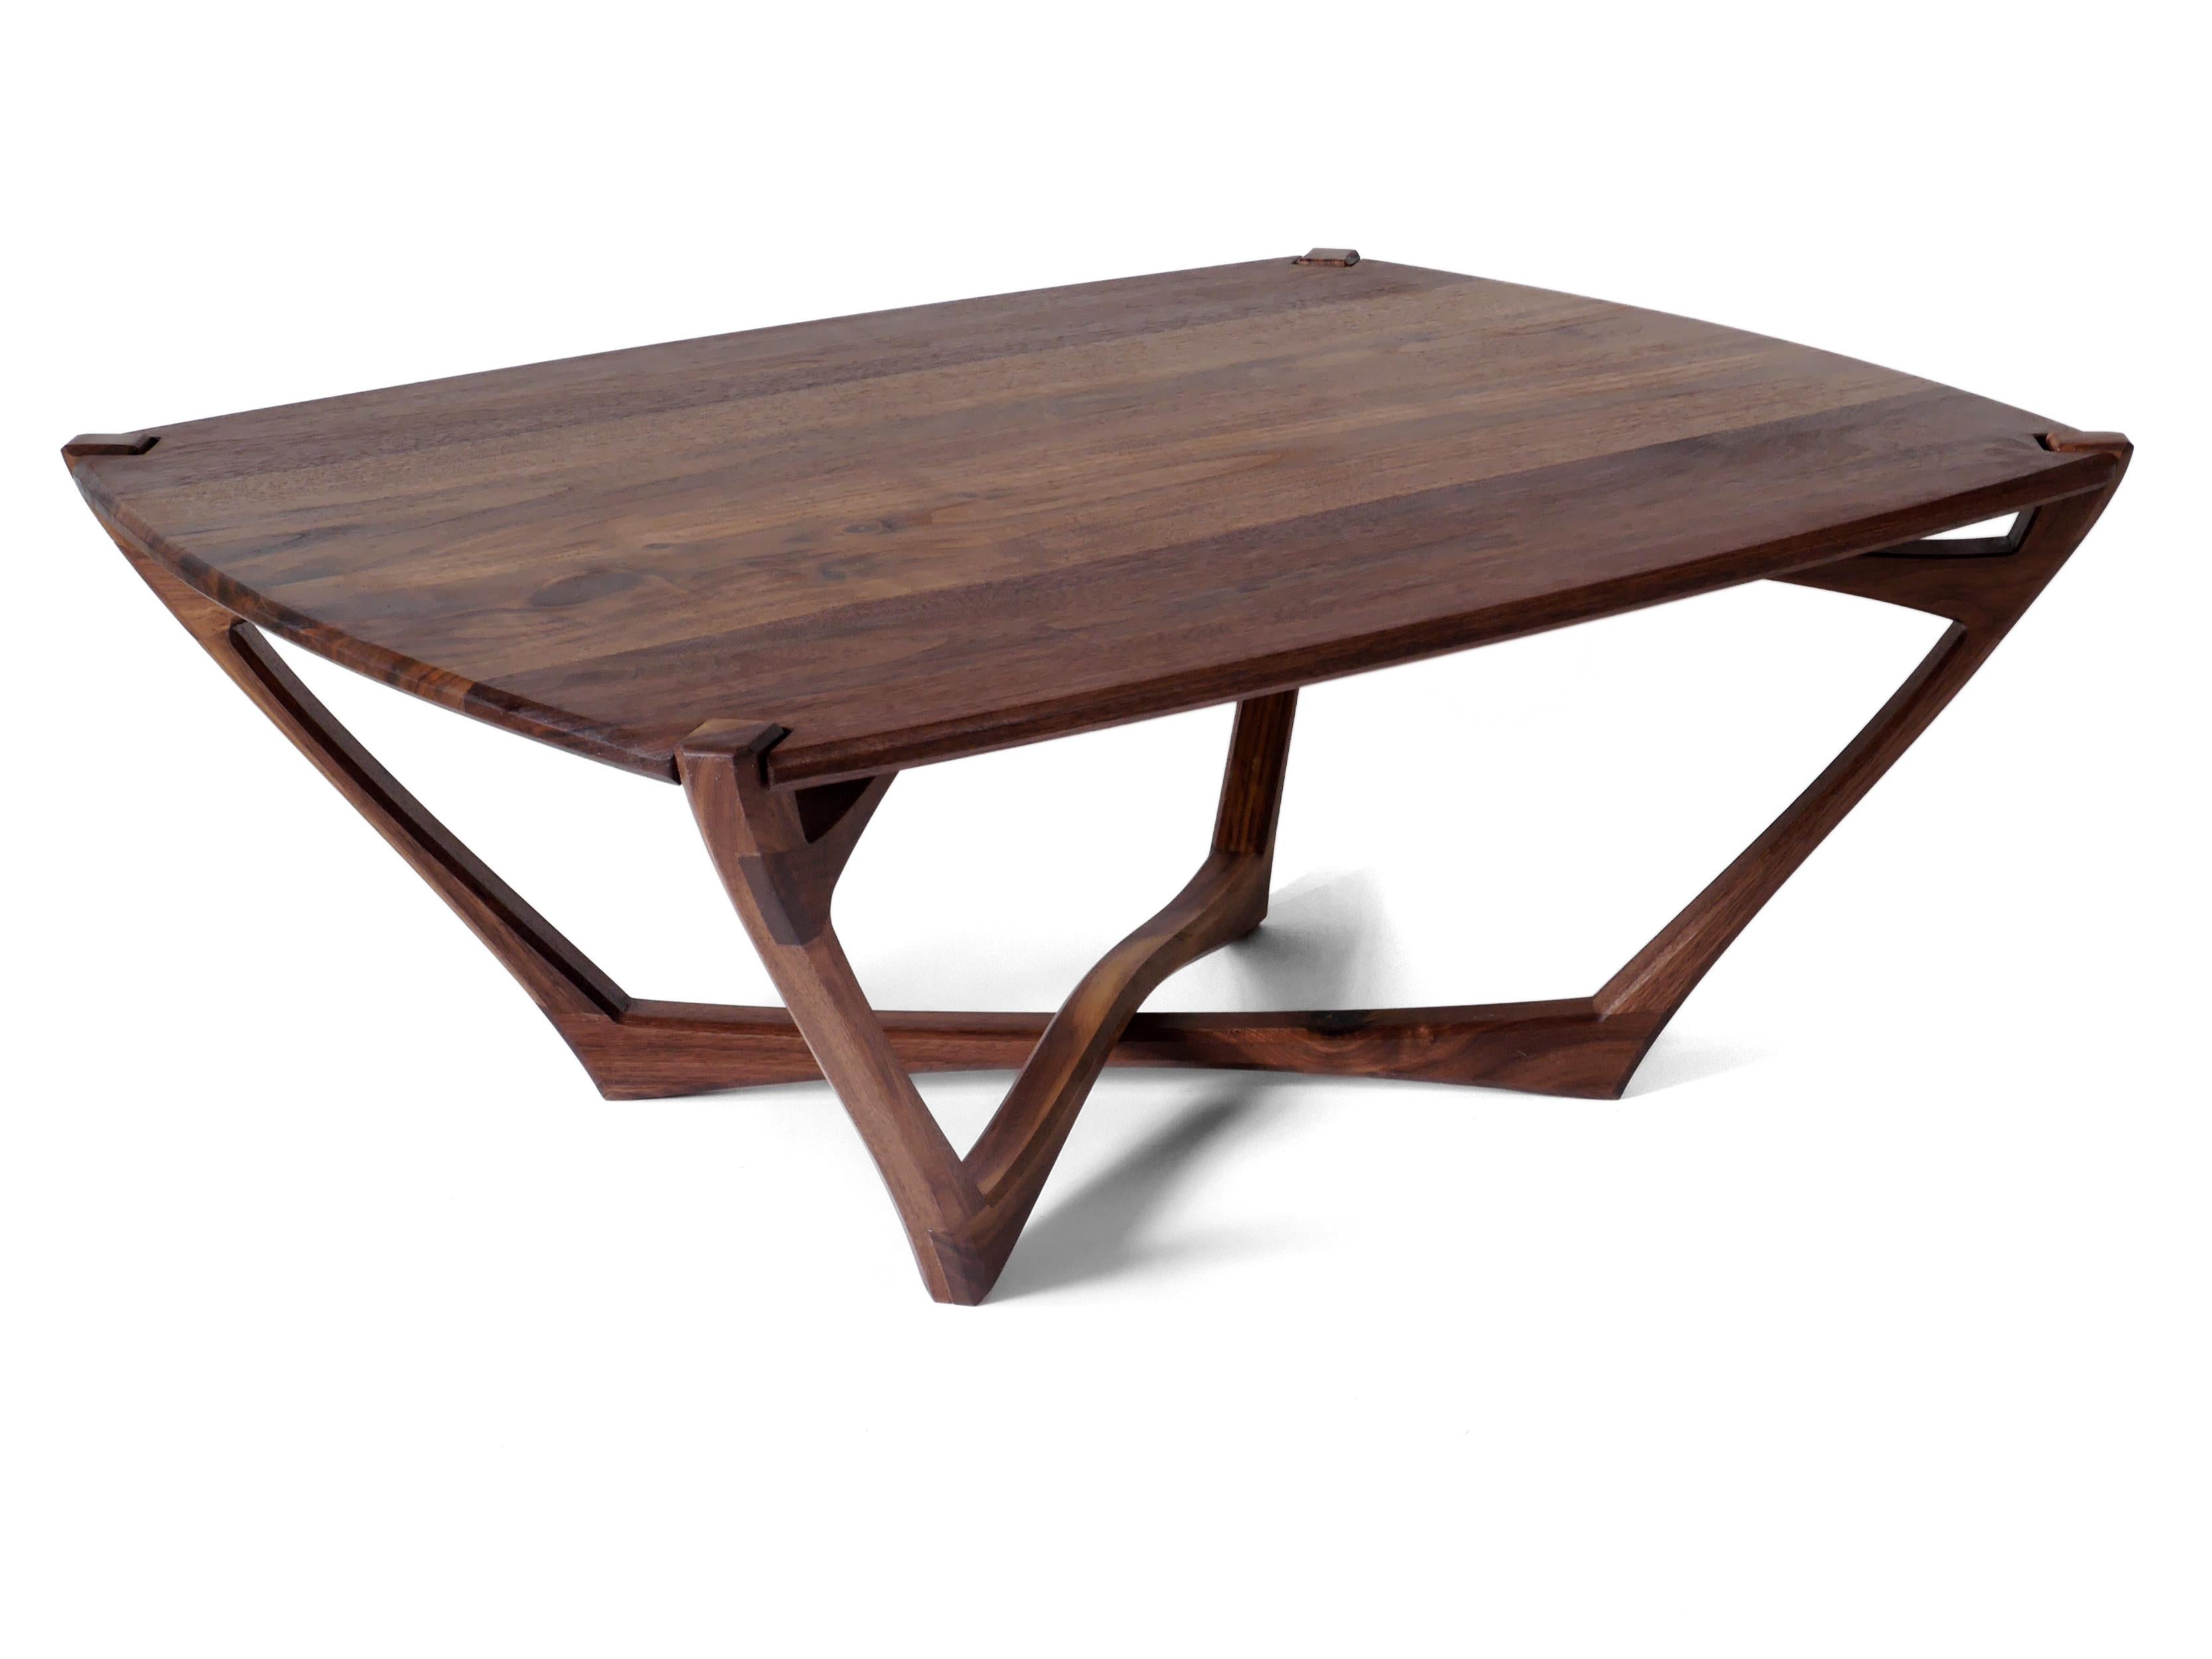 Walnut Mistral Coffee Table, Modern Sculptural Living Room Table by Arid In New Condition For Sale In Albuquerque, NM